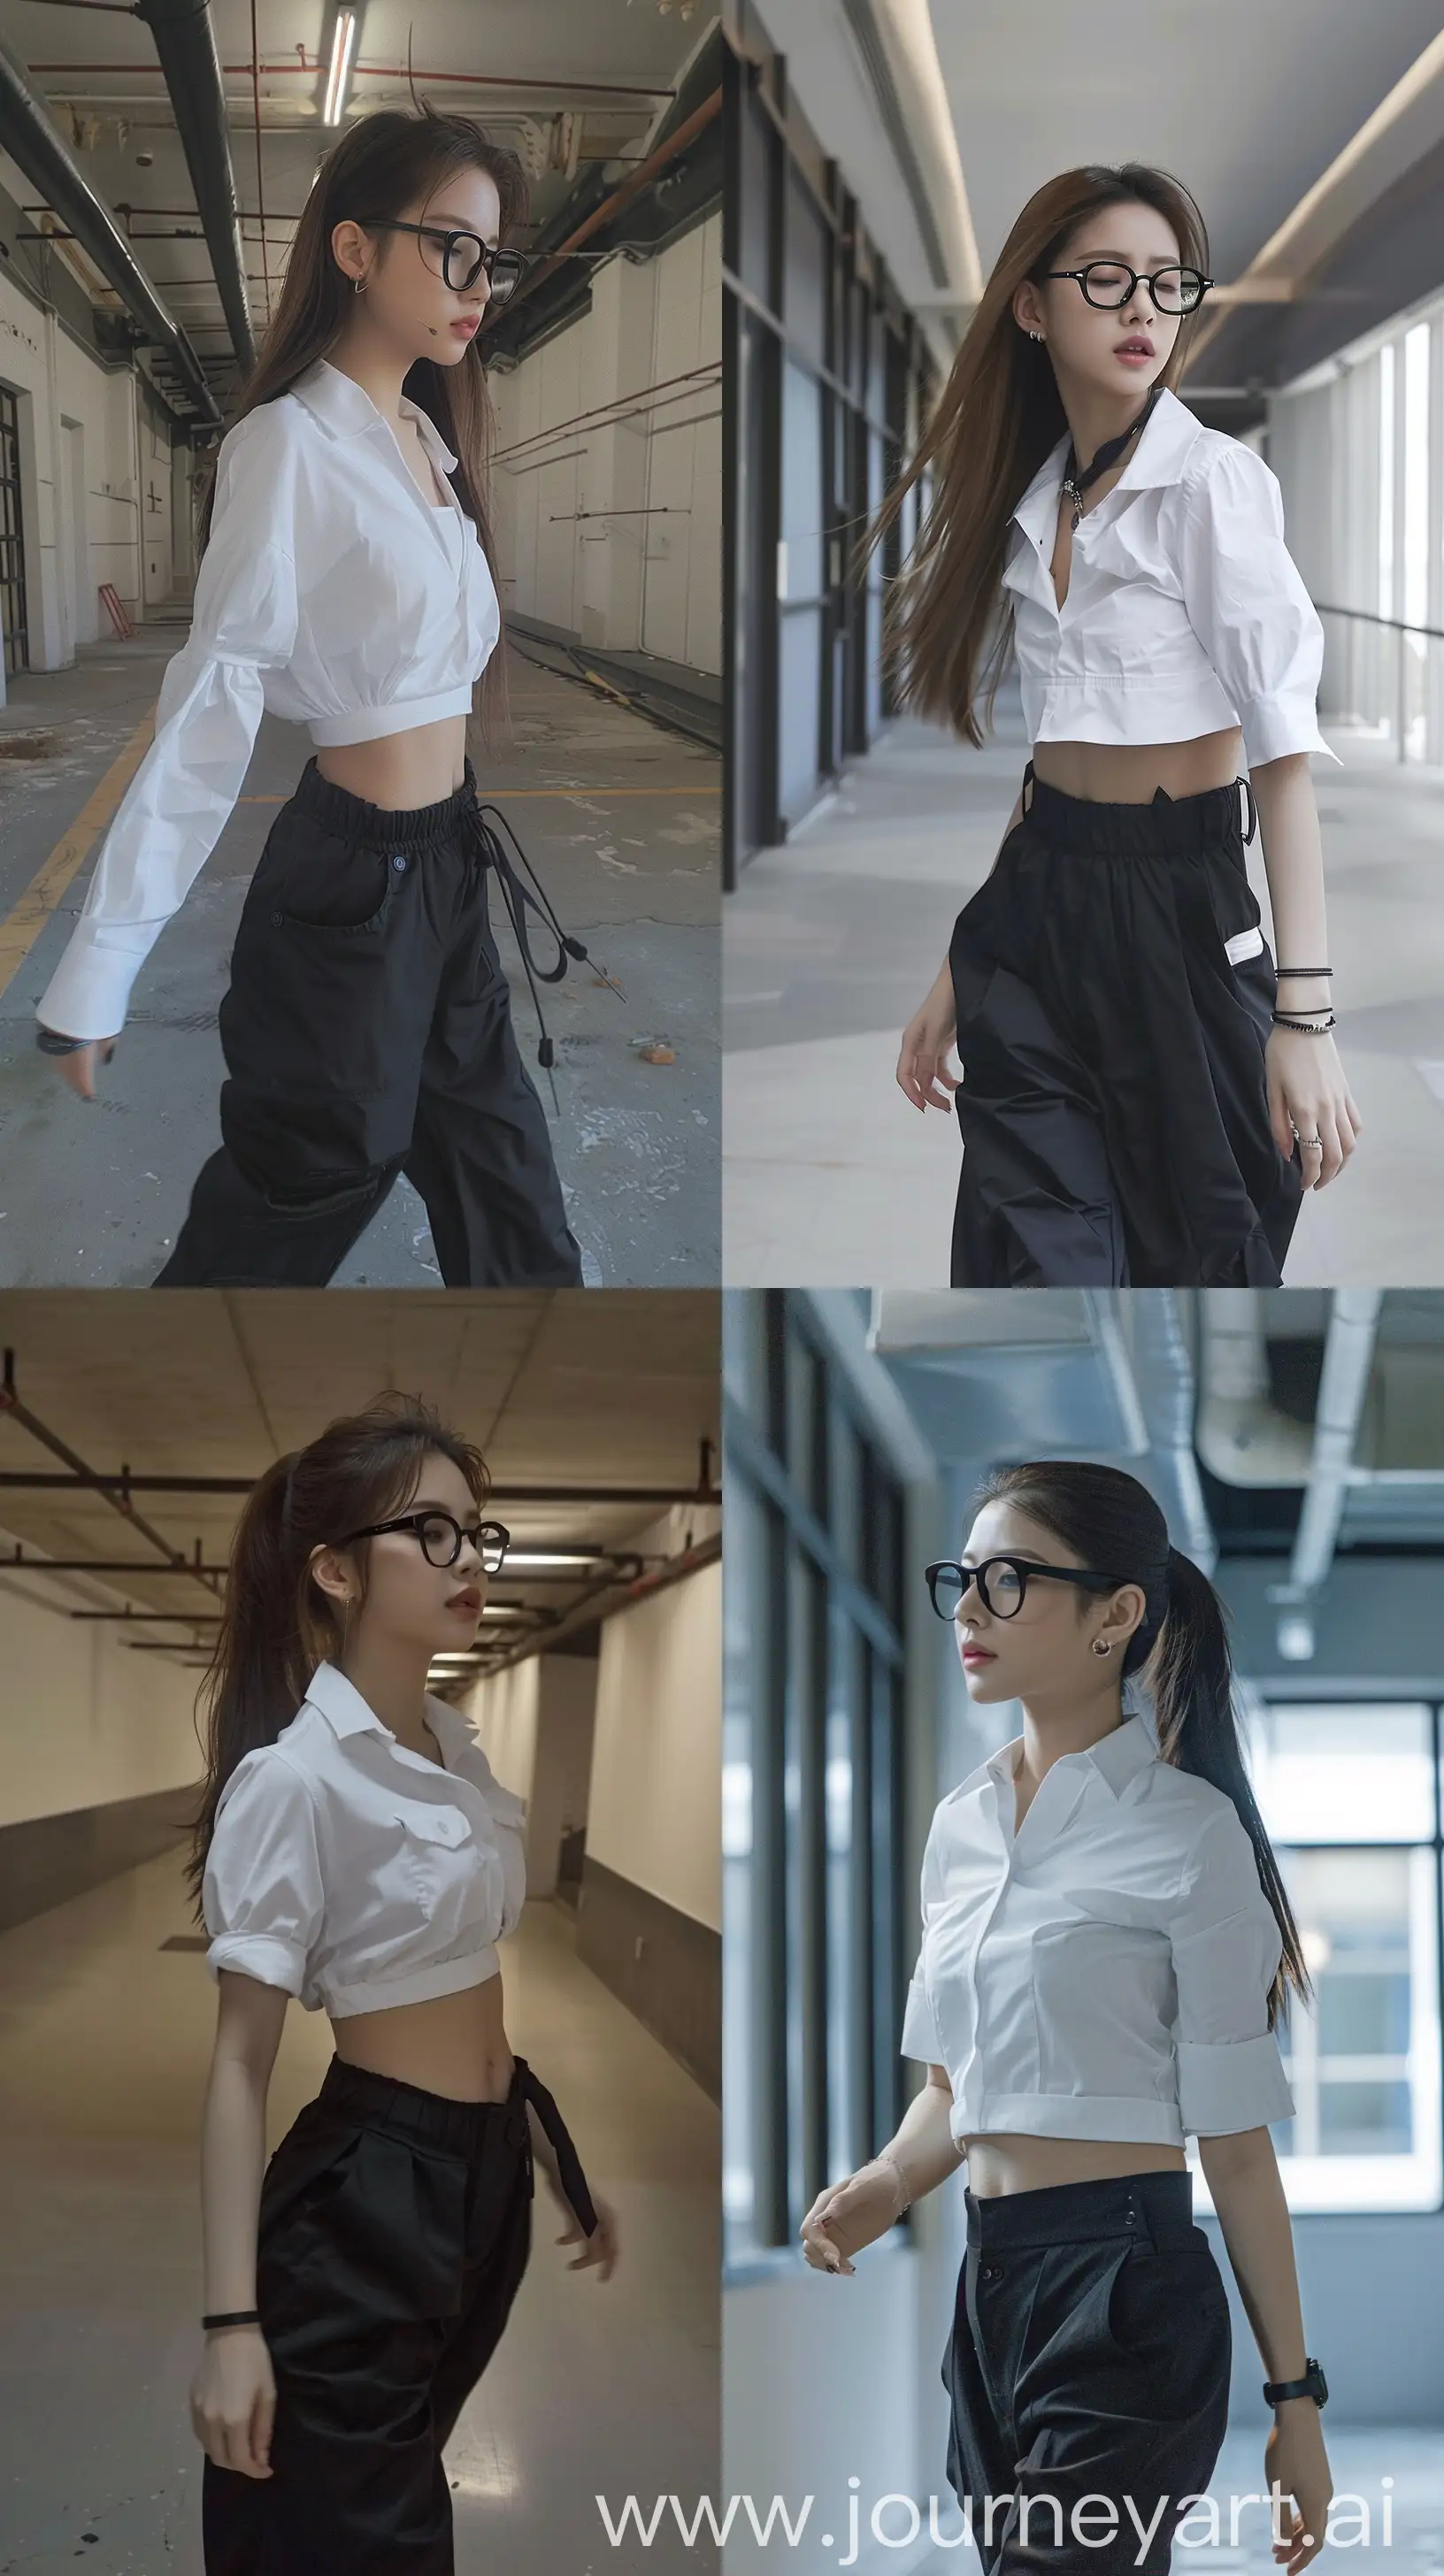 Stylish-Selfie-of-Blackpinks-Jennie-in-White-Crop-Shirt-and-Black-Baggy-Pants-Walking-Through-Empty-Apartment-Hall